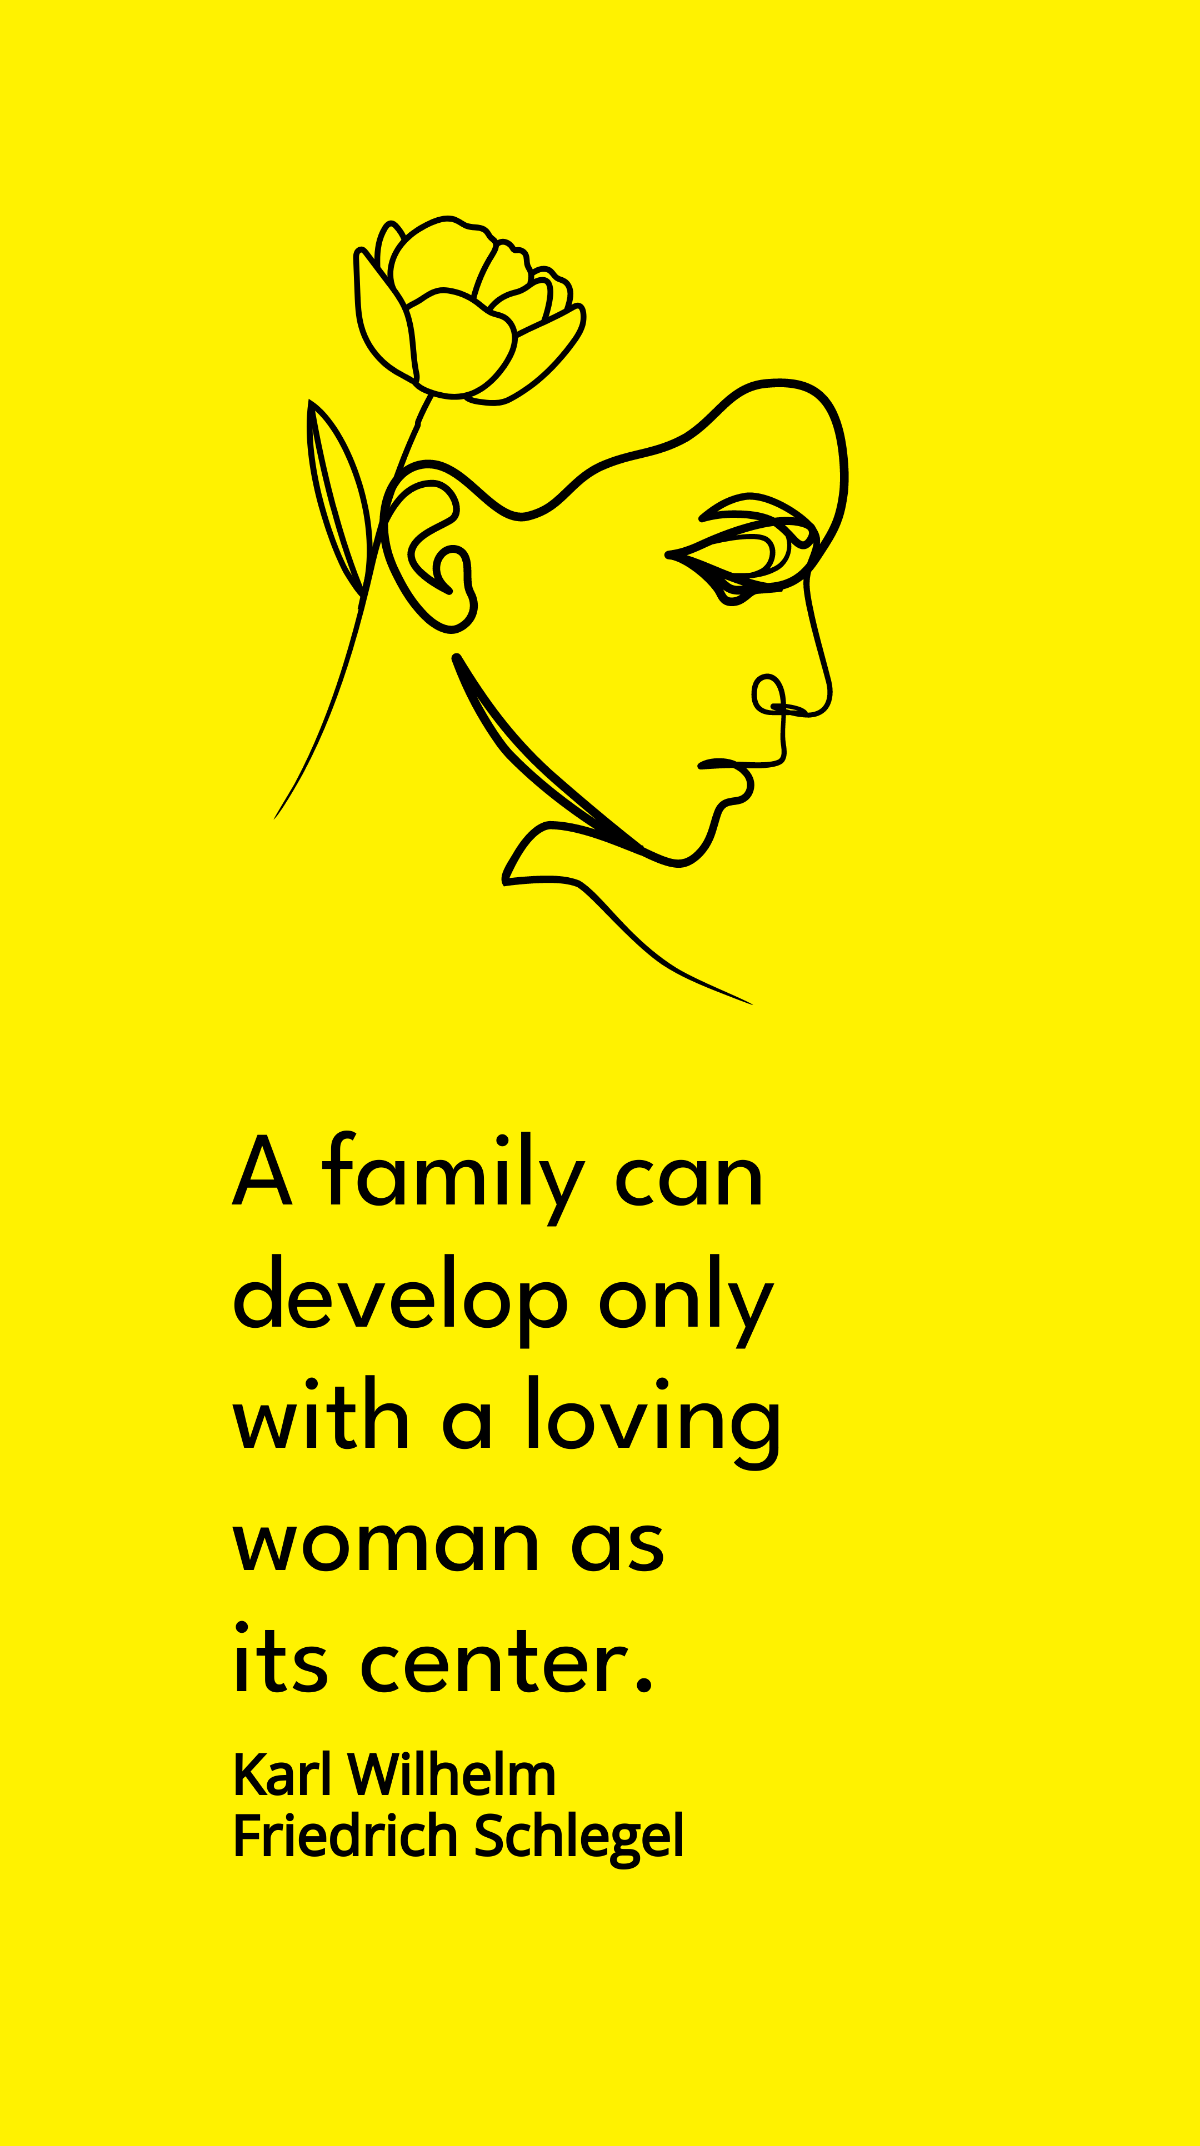 Karl Wilhelm Friedrich Schlegel - A family can develop only with a loving woman as its center. Template